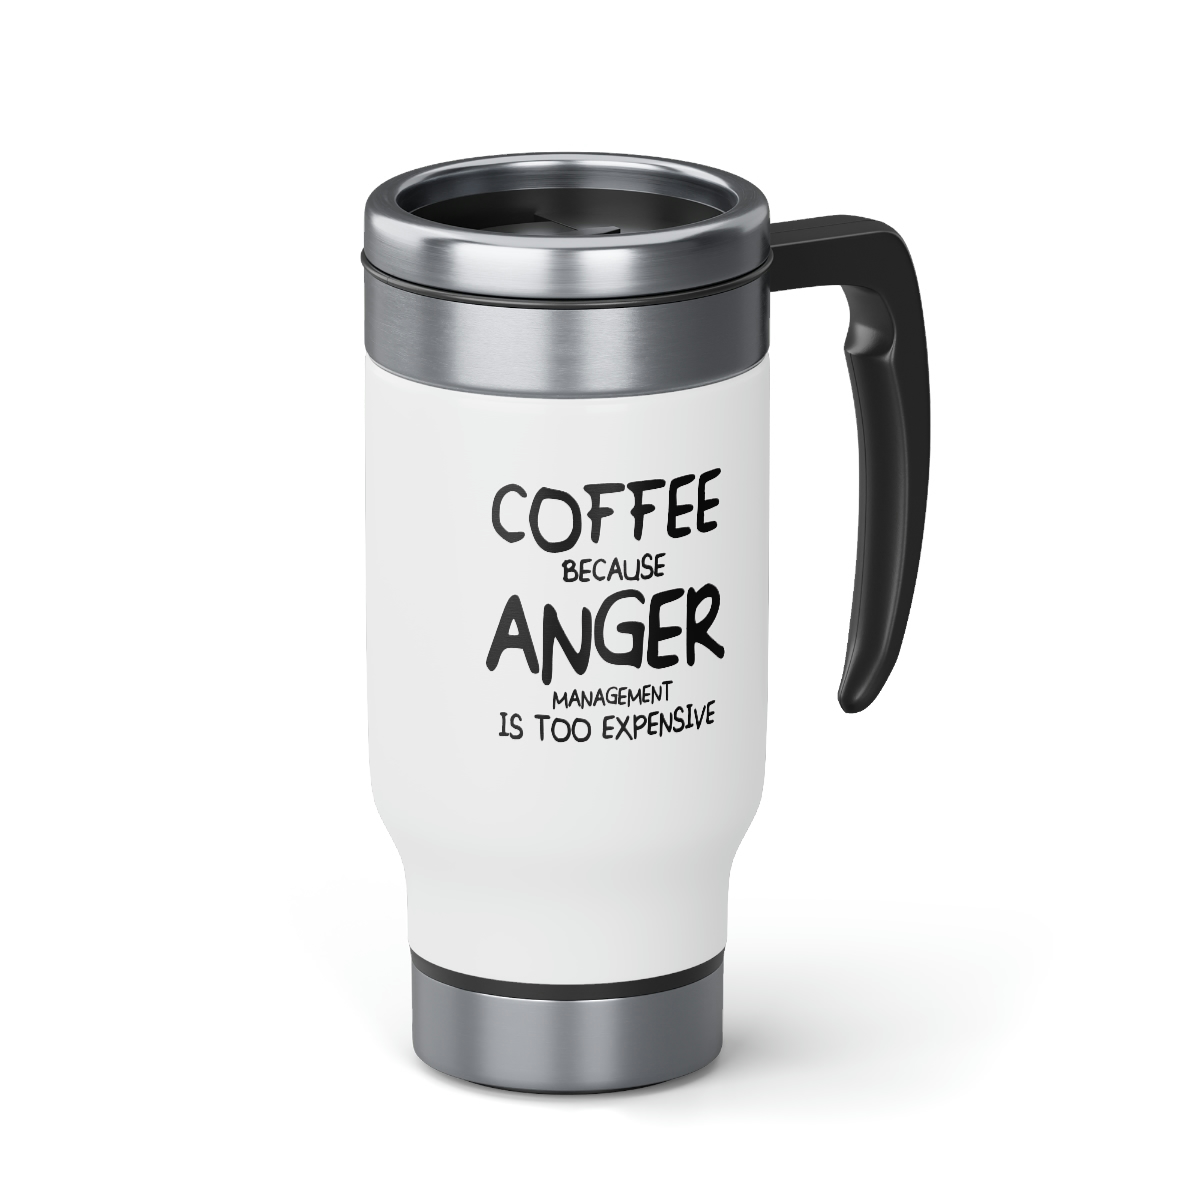 Coffee because Anger Management is too expensive